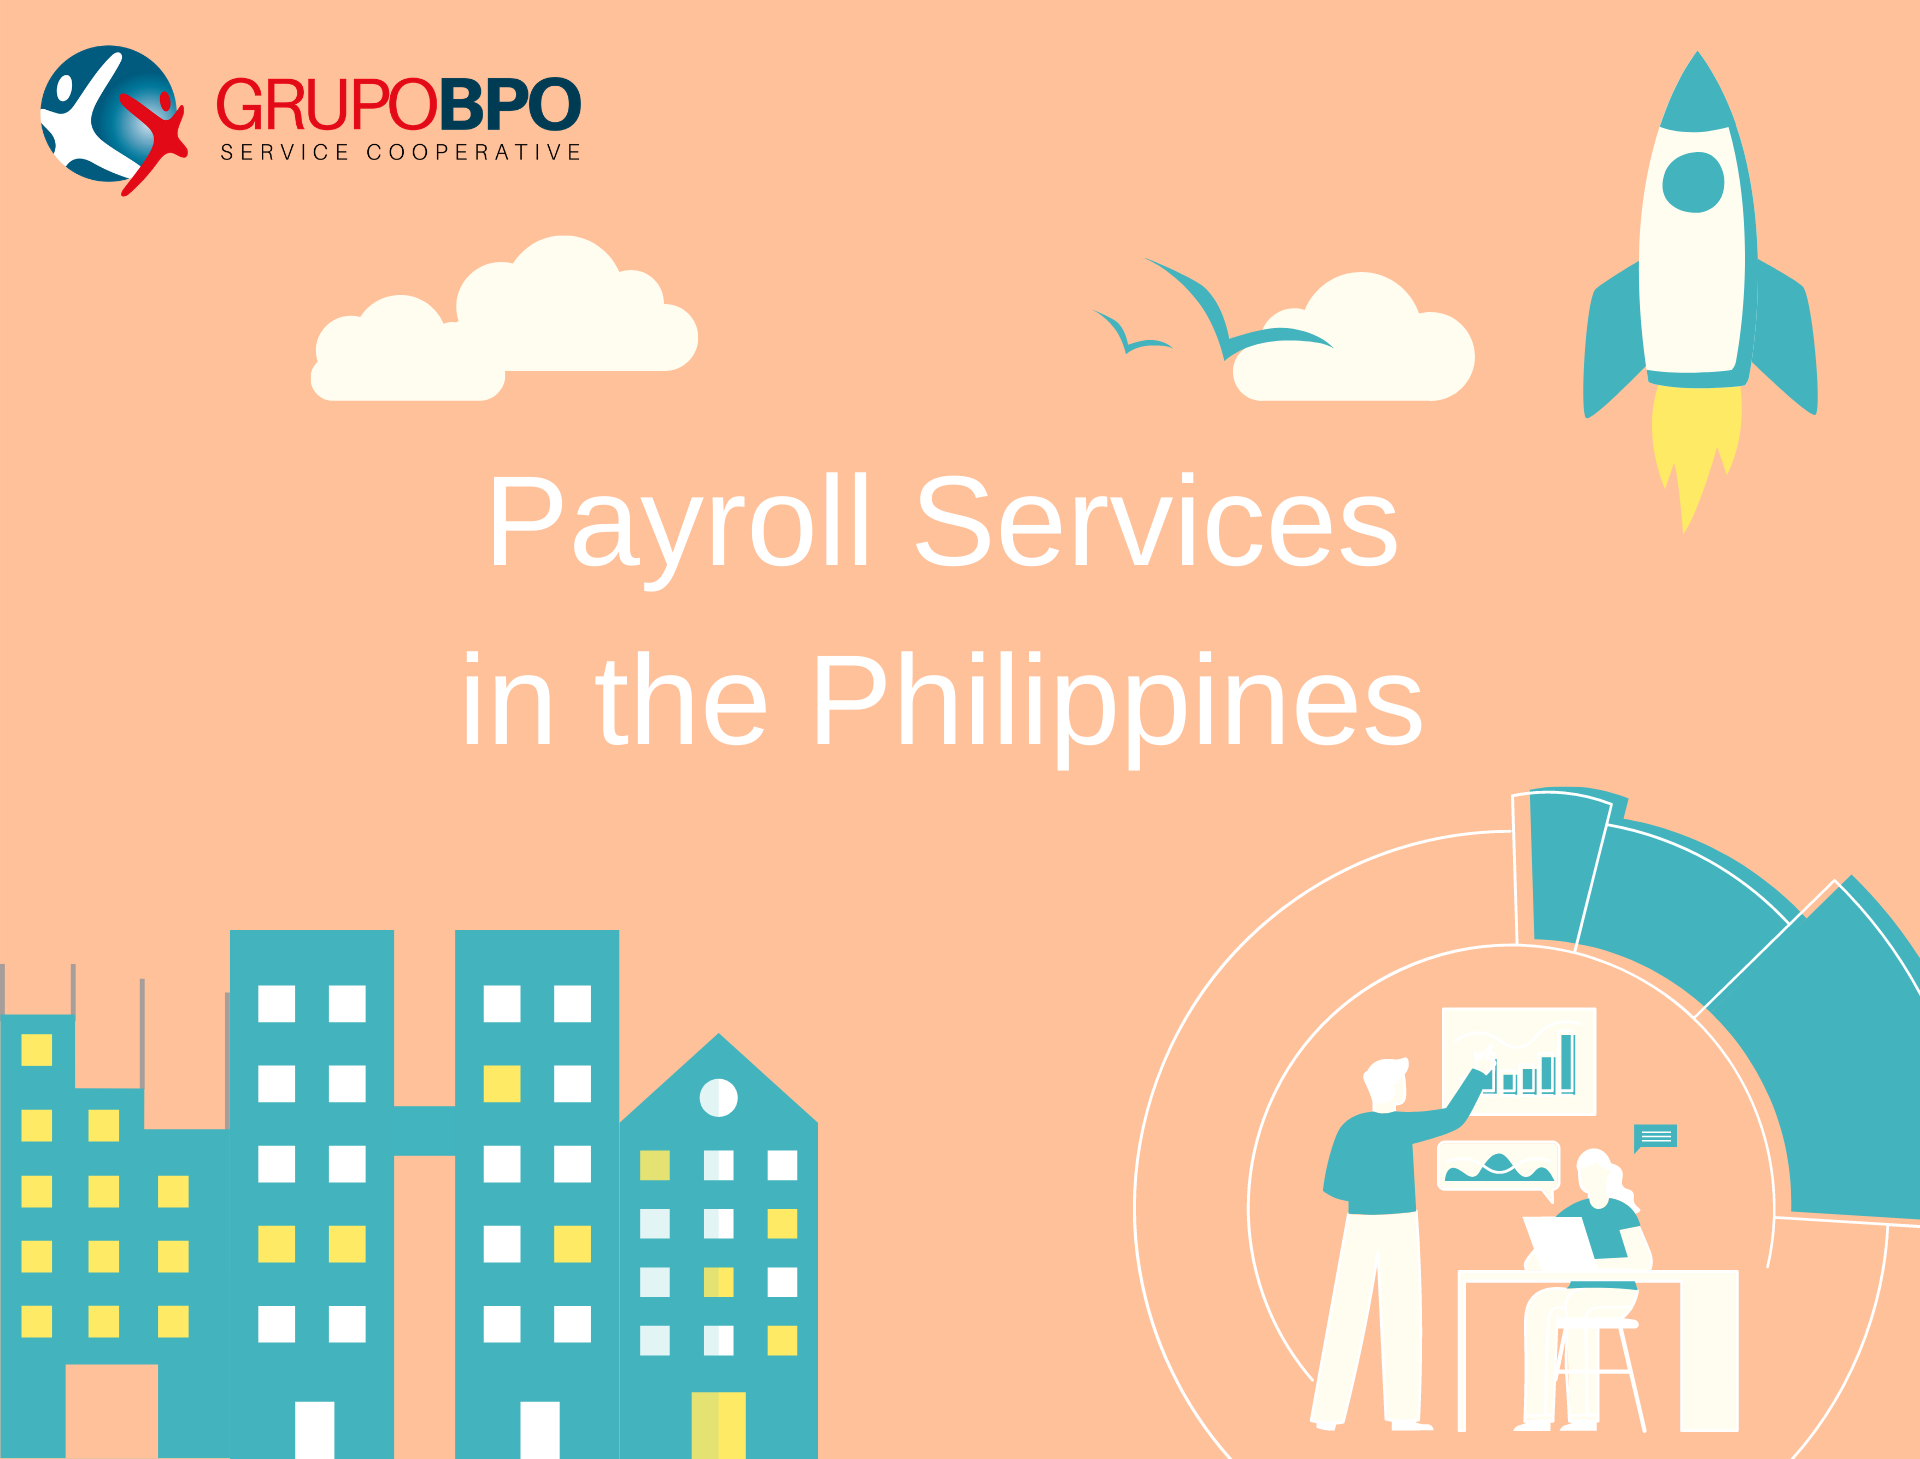 Payroll Services in the Philippines is Expected to Grow in the Decade and Beyond